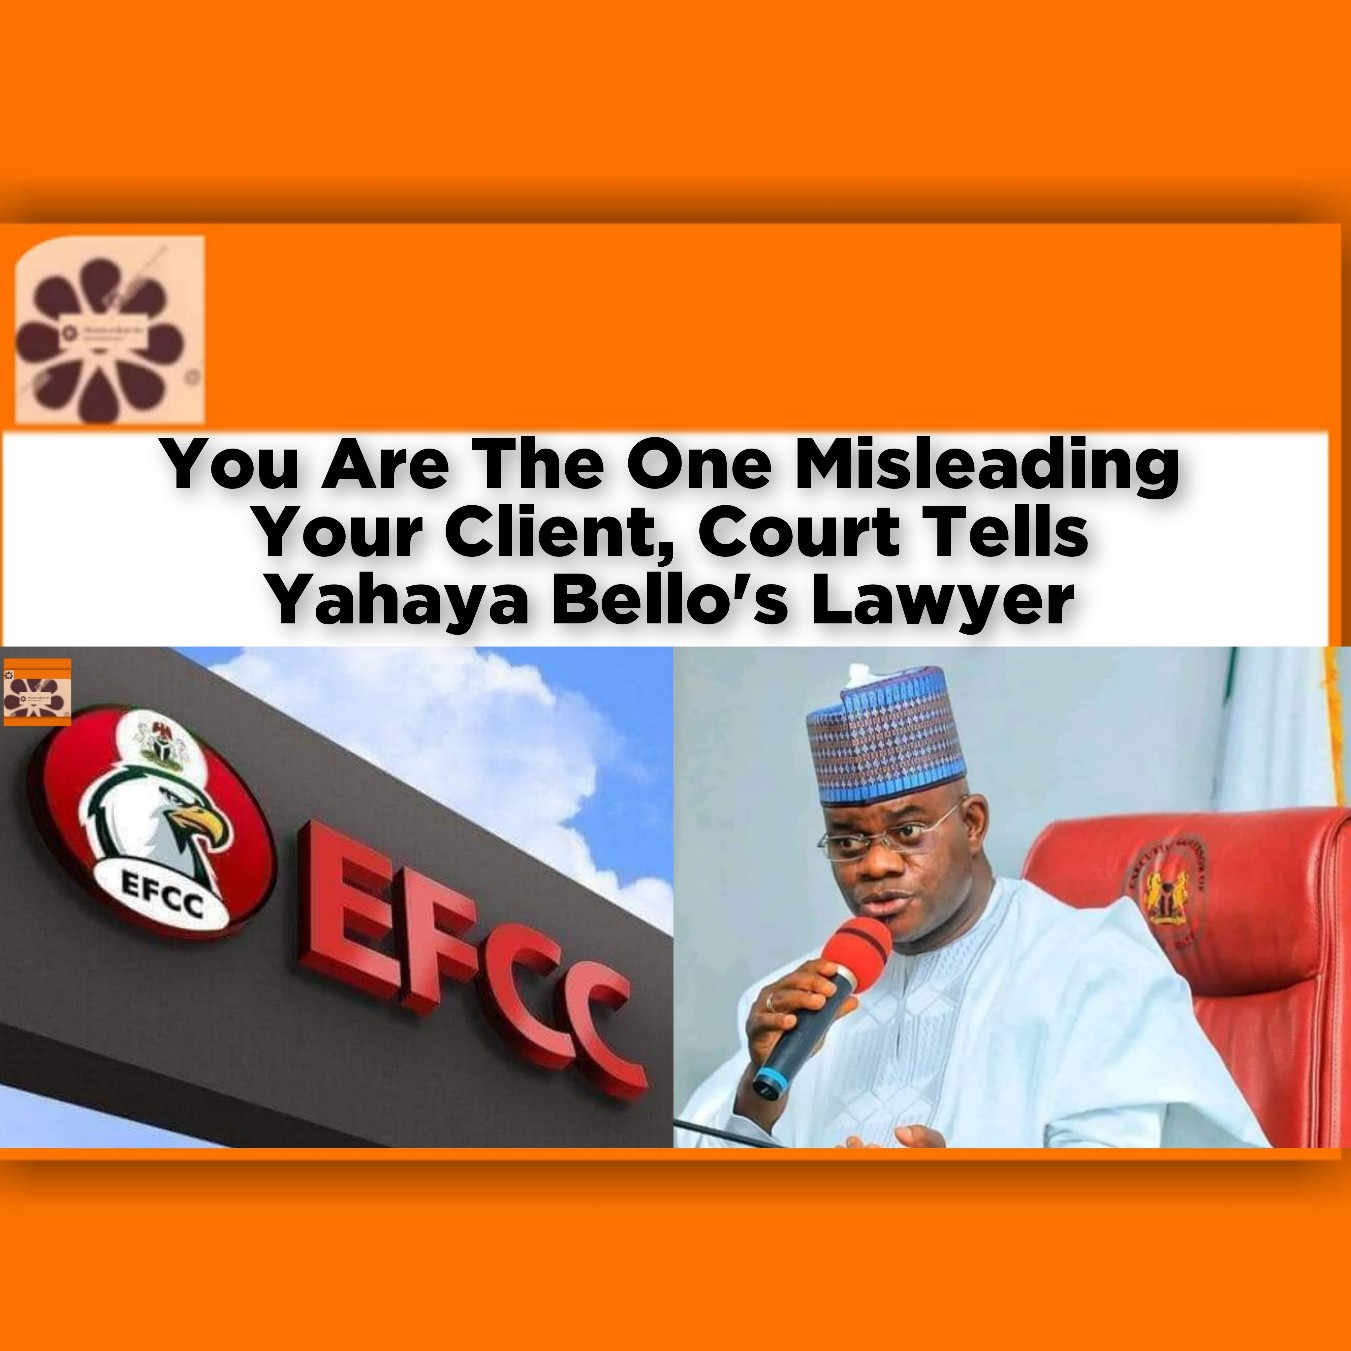 You Are The One Misleading Your Client, Court Tells Yahaya Bello's Lawyer ~ OsazuwaAkonedo #army